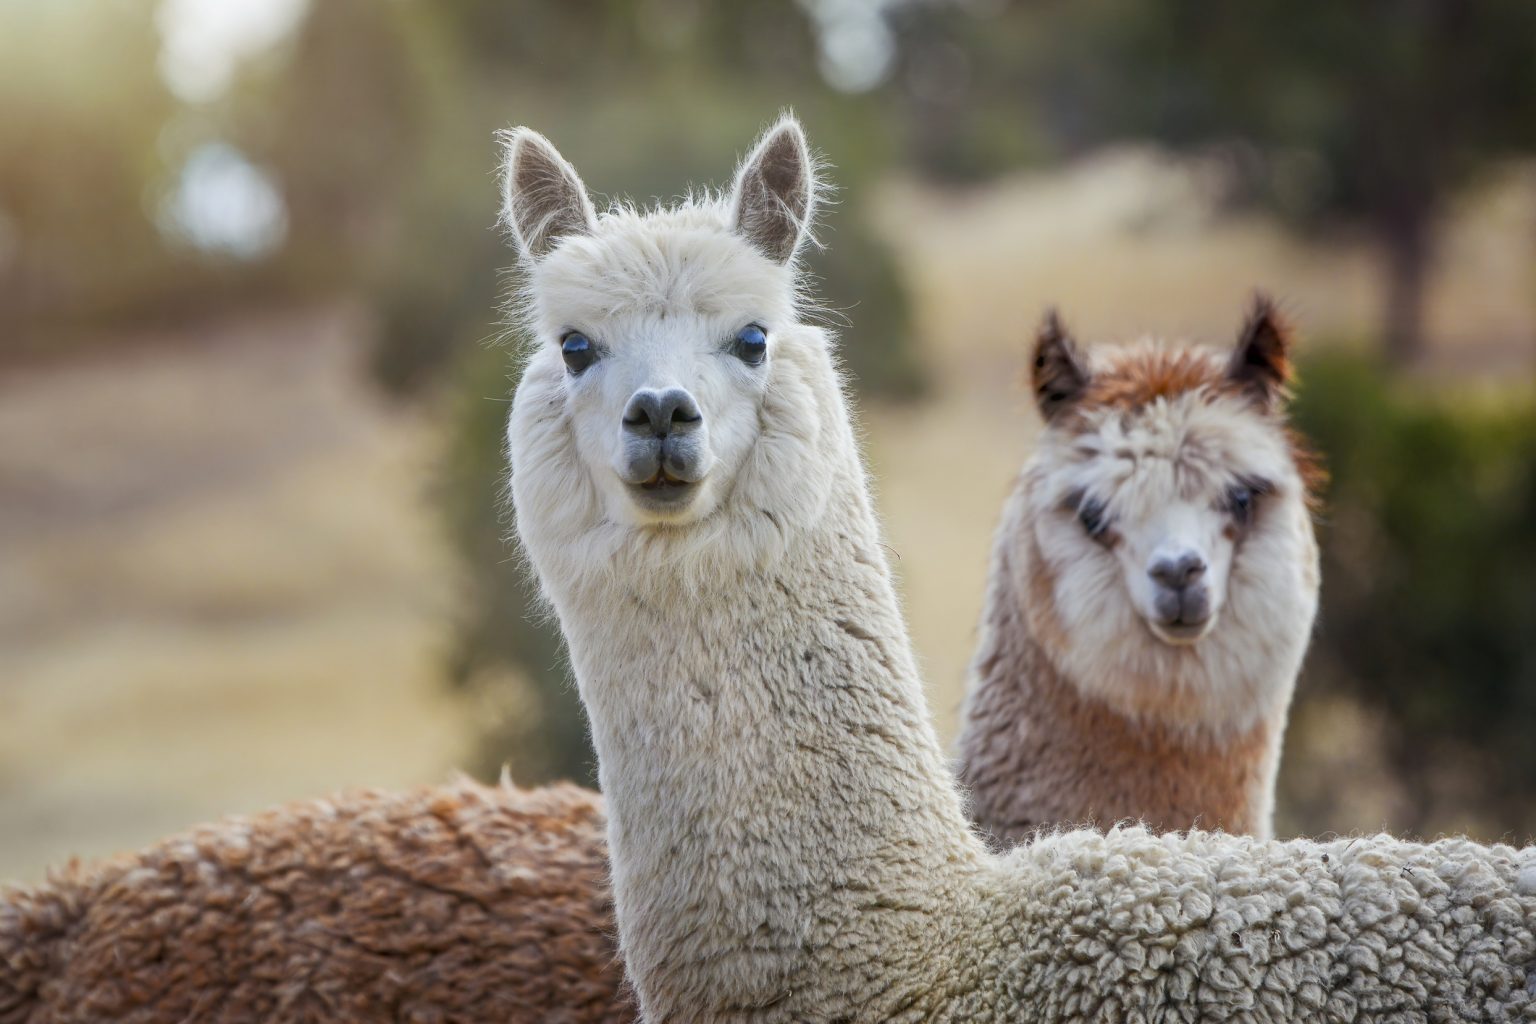 Close up portrait of two llamas, one white and one brown and white